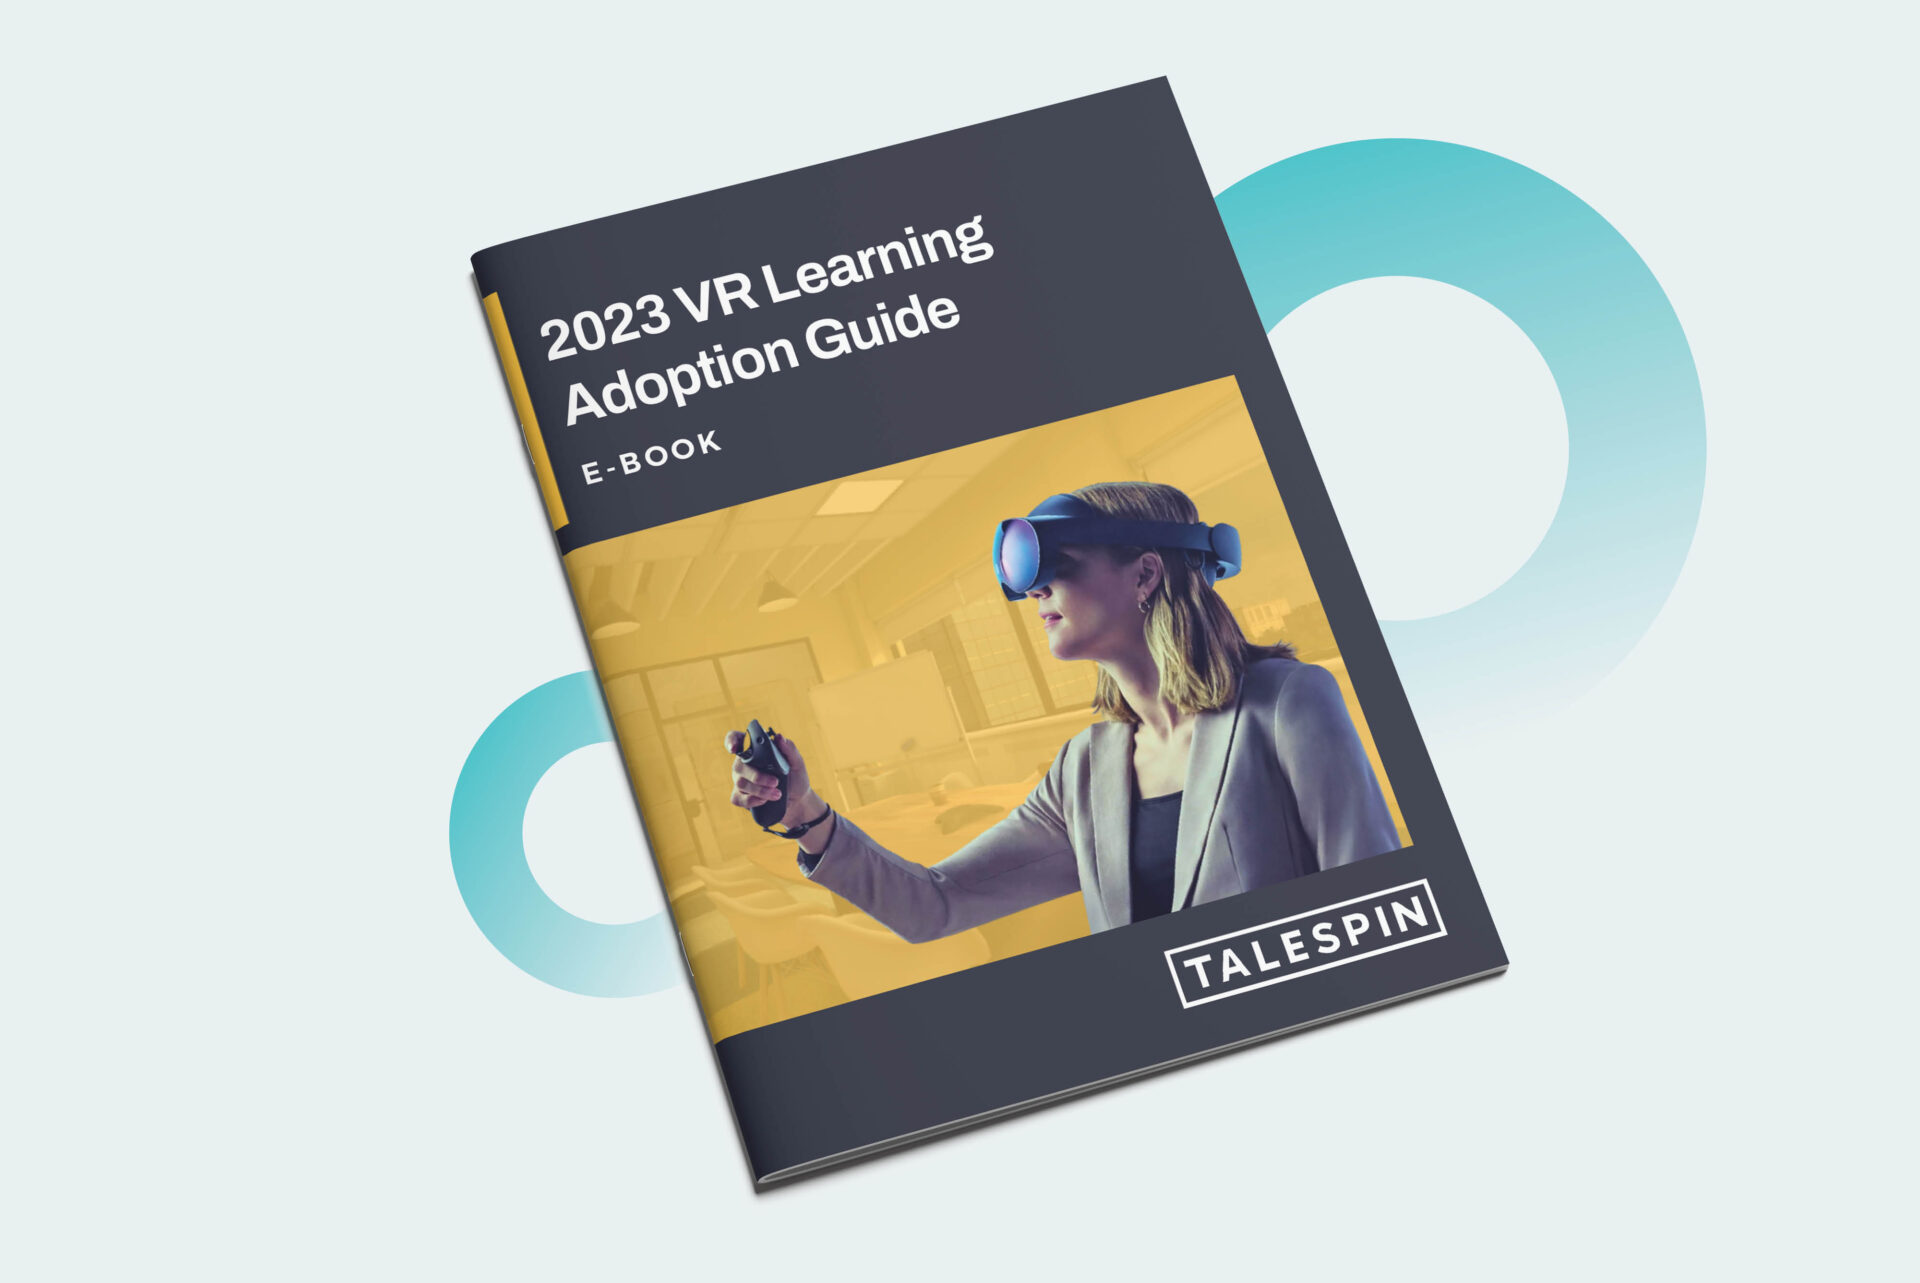 VR Learning Adoption Guide